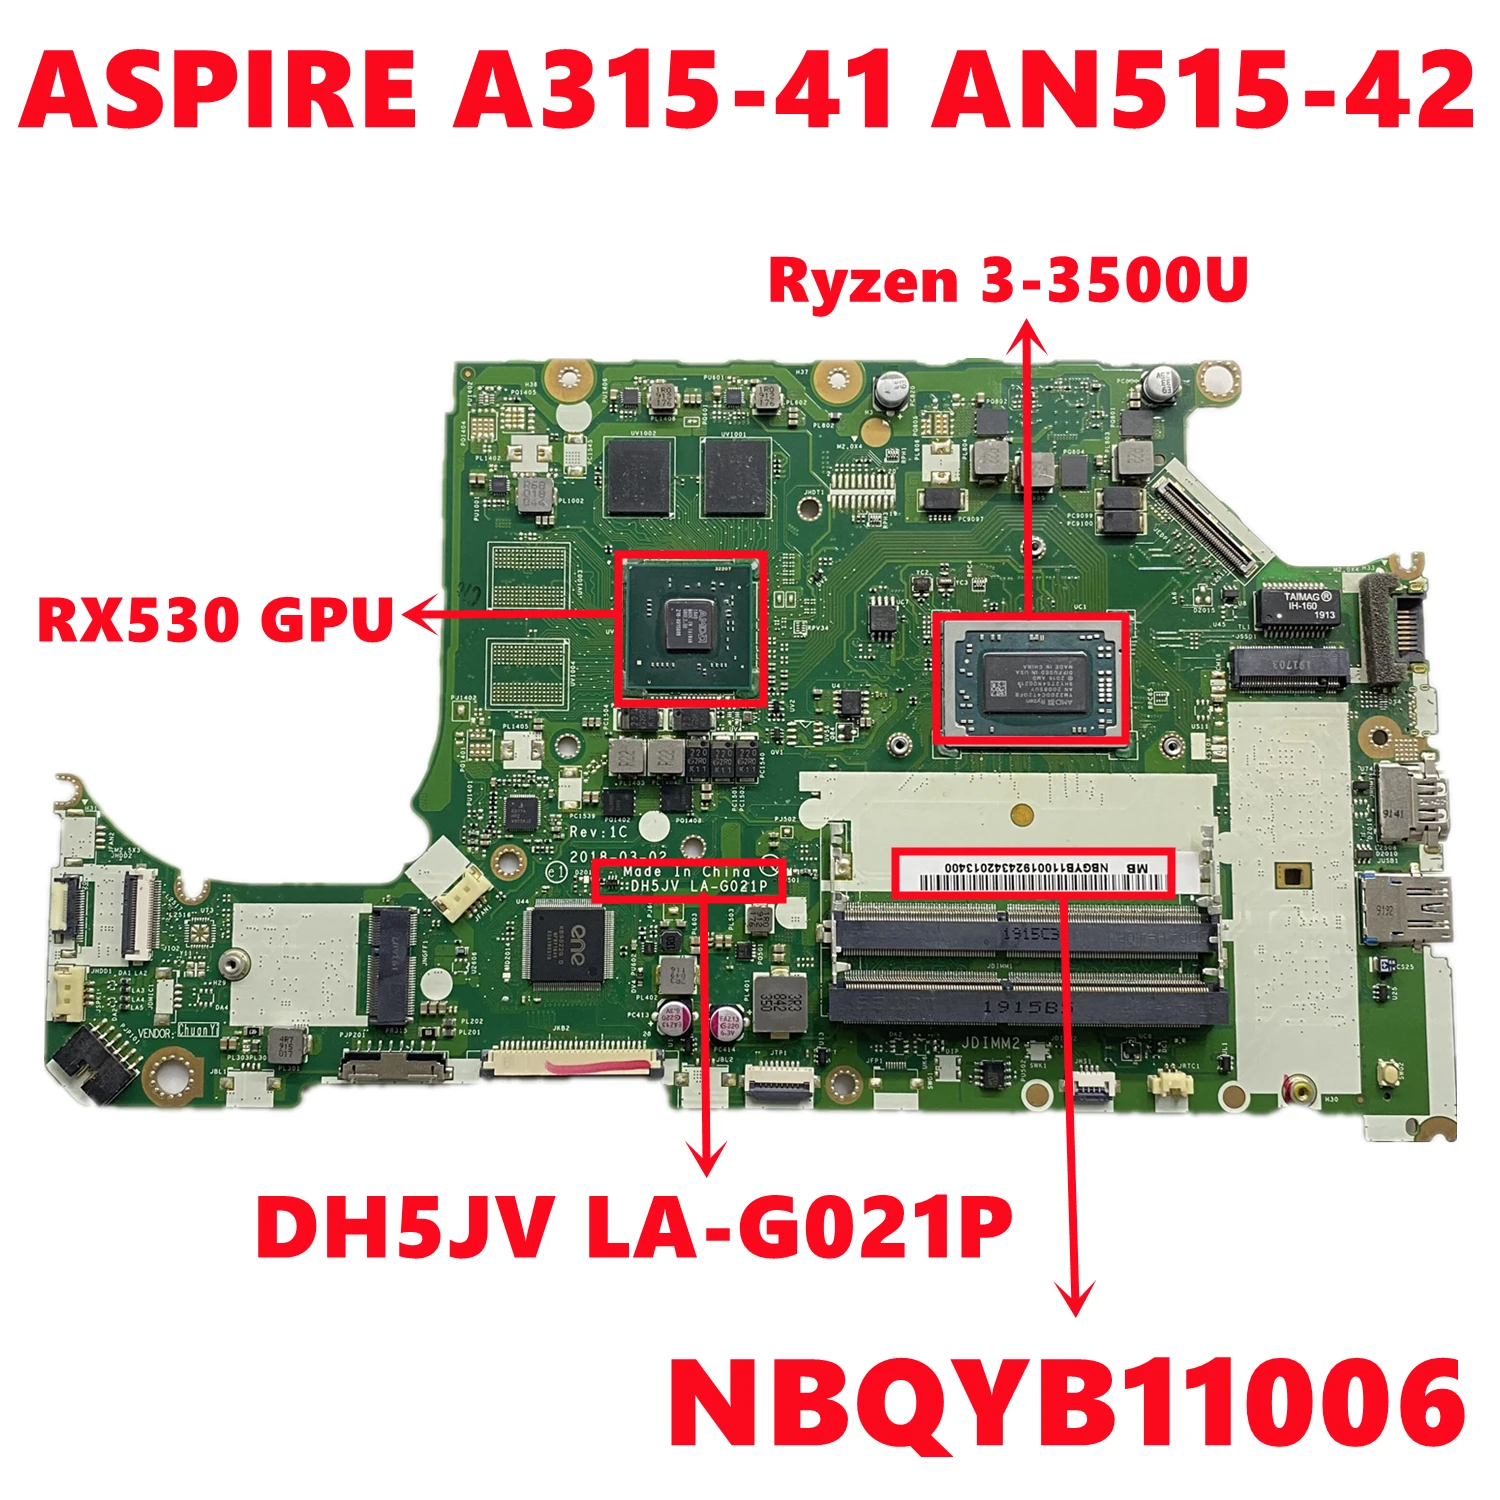 

NBQYB11006 For Acer ASPIRE A315-41 AN515-42 Laptop Motherboard DH5JV LA-G021P With Ryzen 3-3500U CPU 216-0915006 GPU 100% Tested